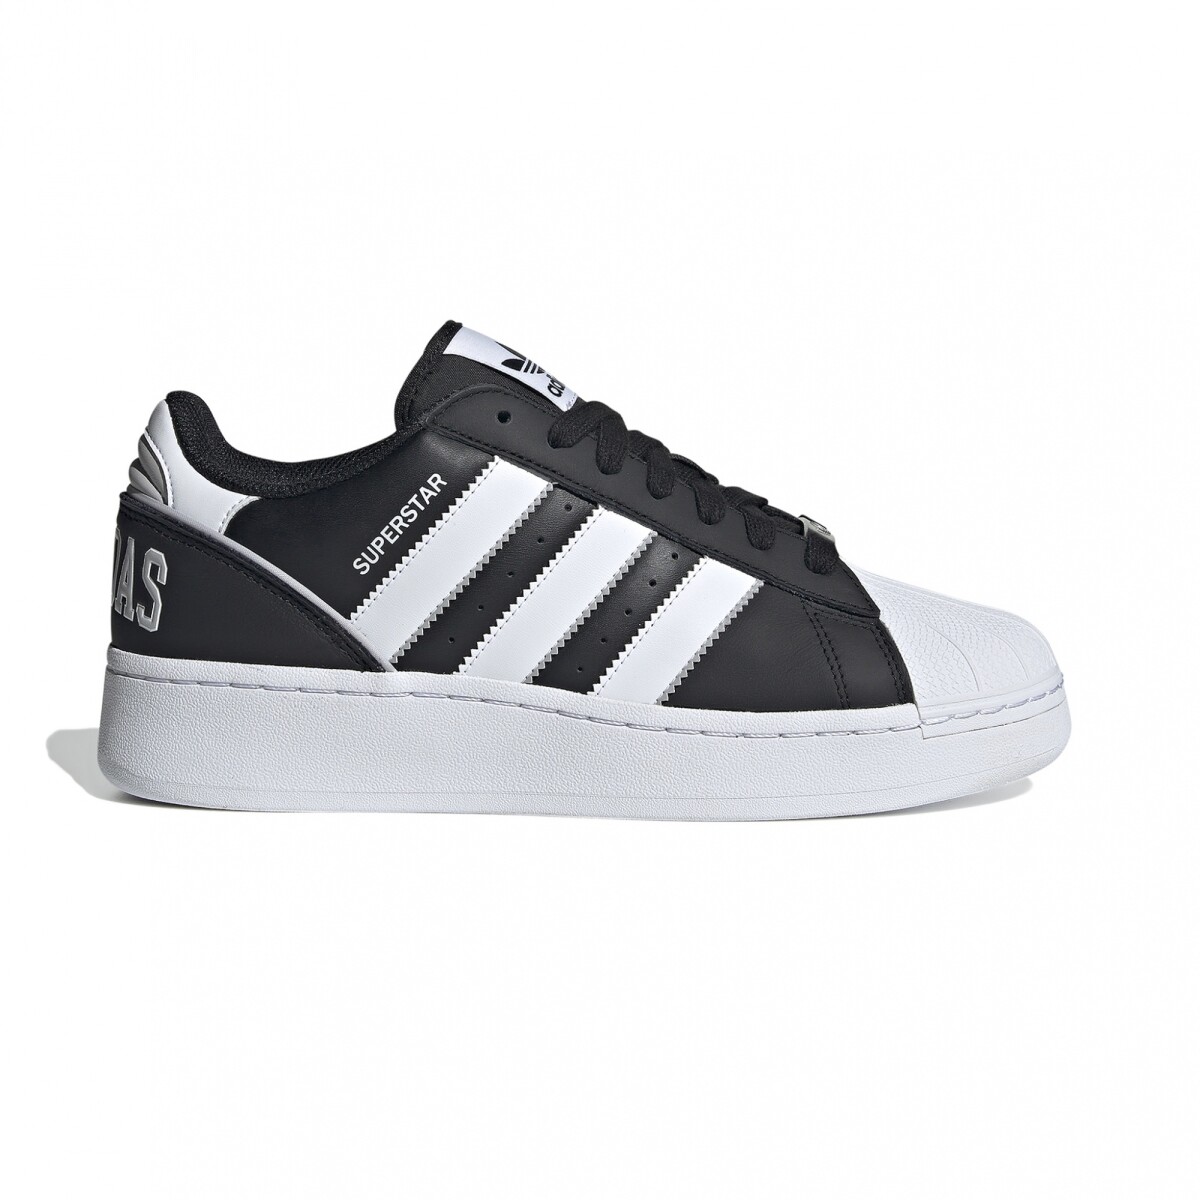 adidas SUPERSTAR XLG - CORE BLACK/FTWR WHITE 